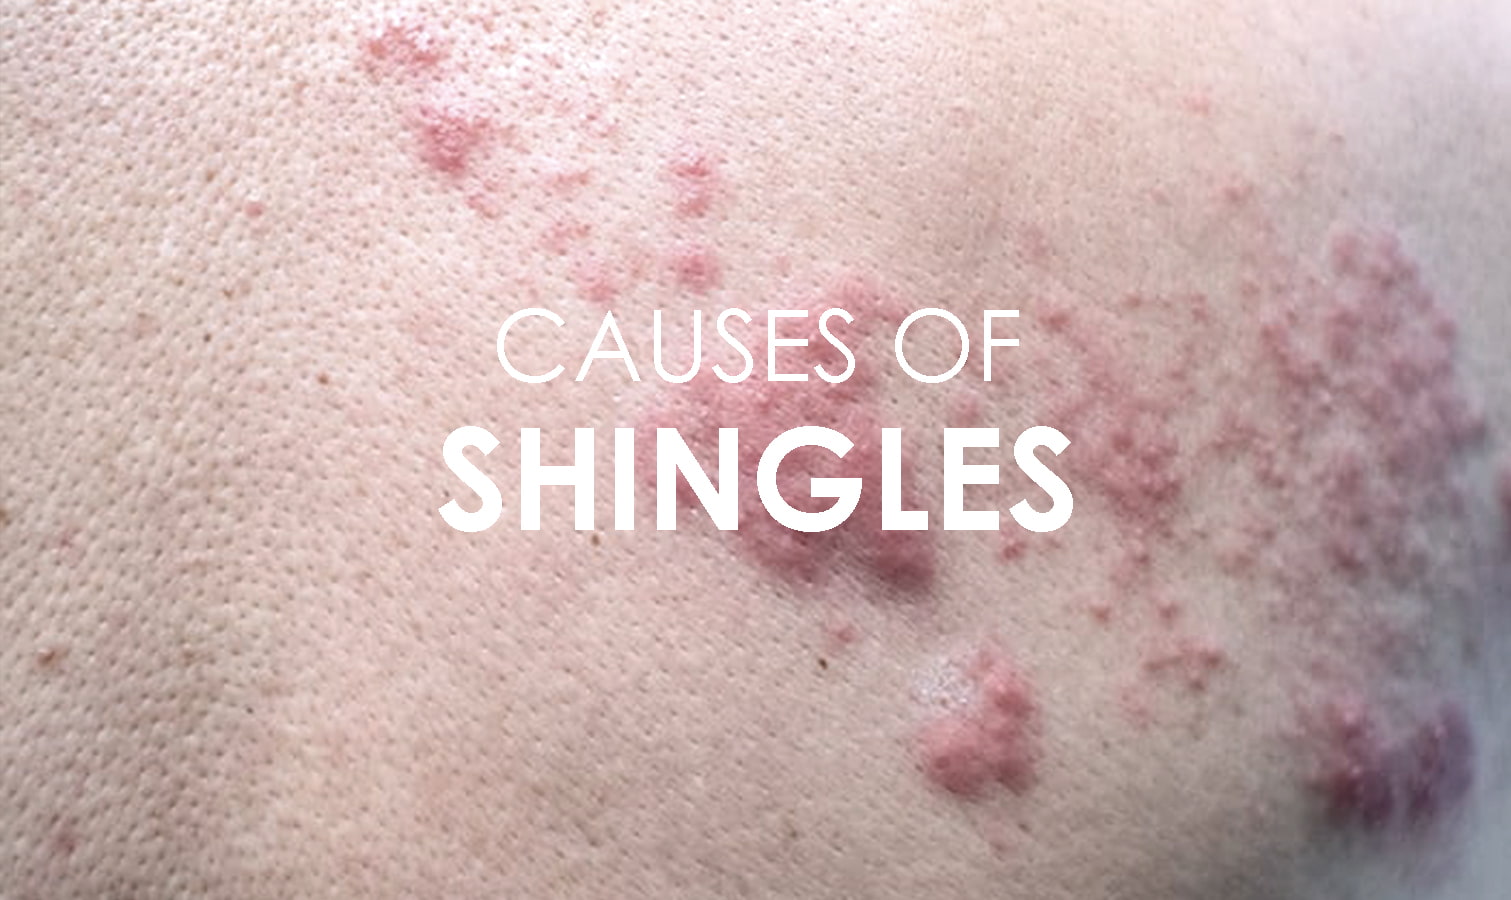 Shingles Disease Causes Symptoms And Treatments Premier Clinic